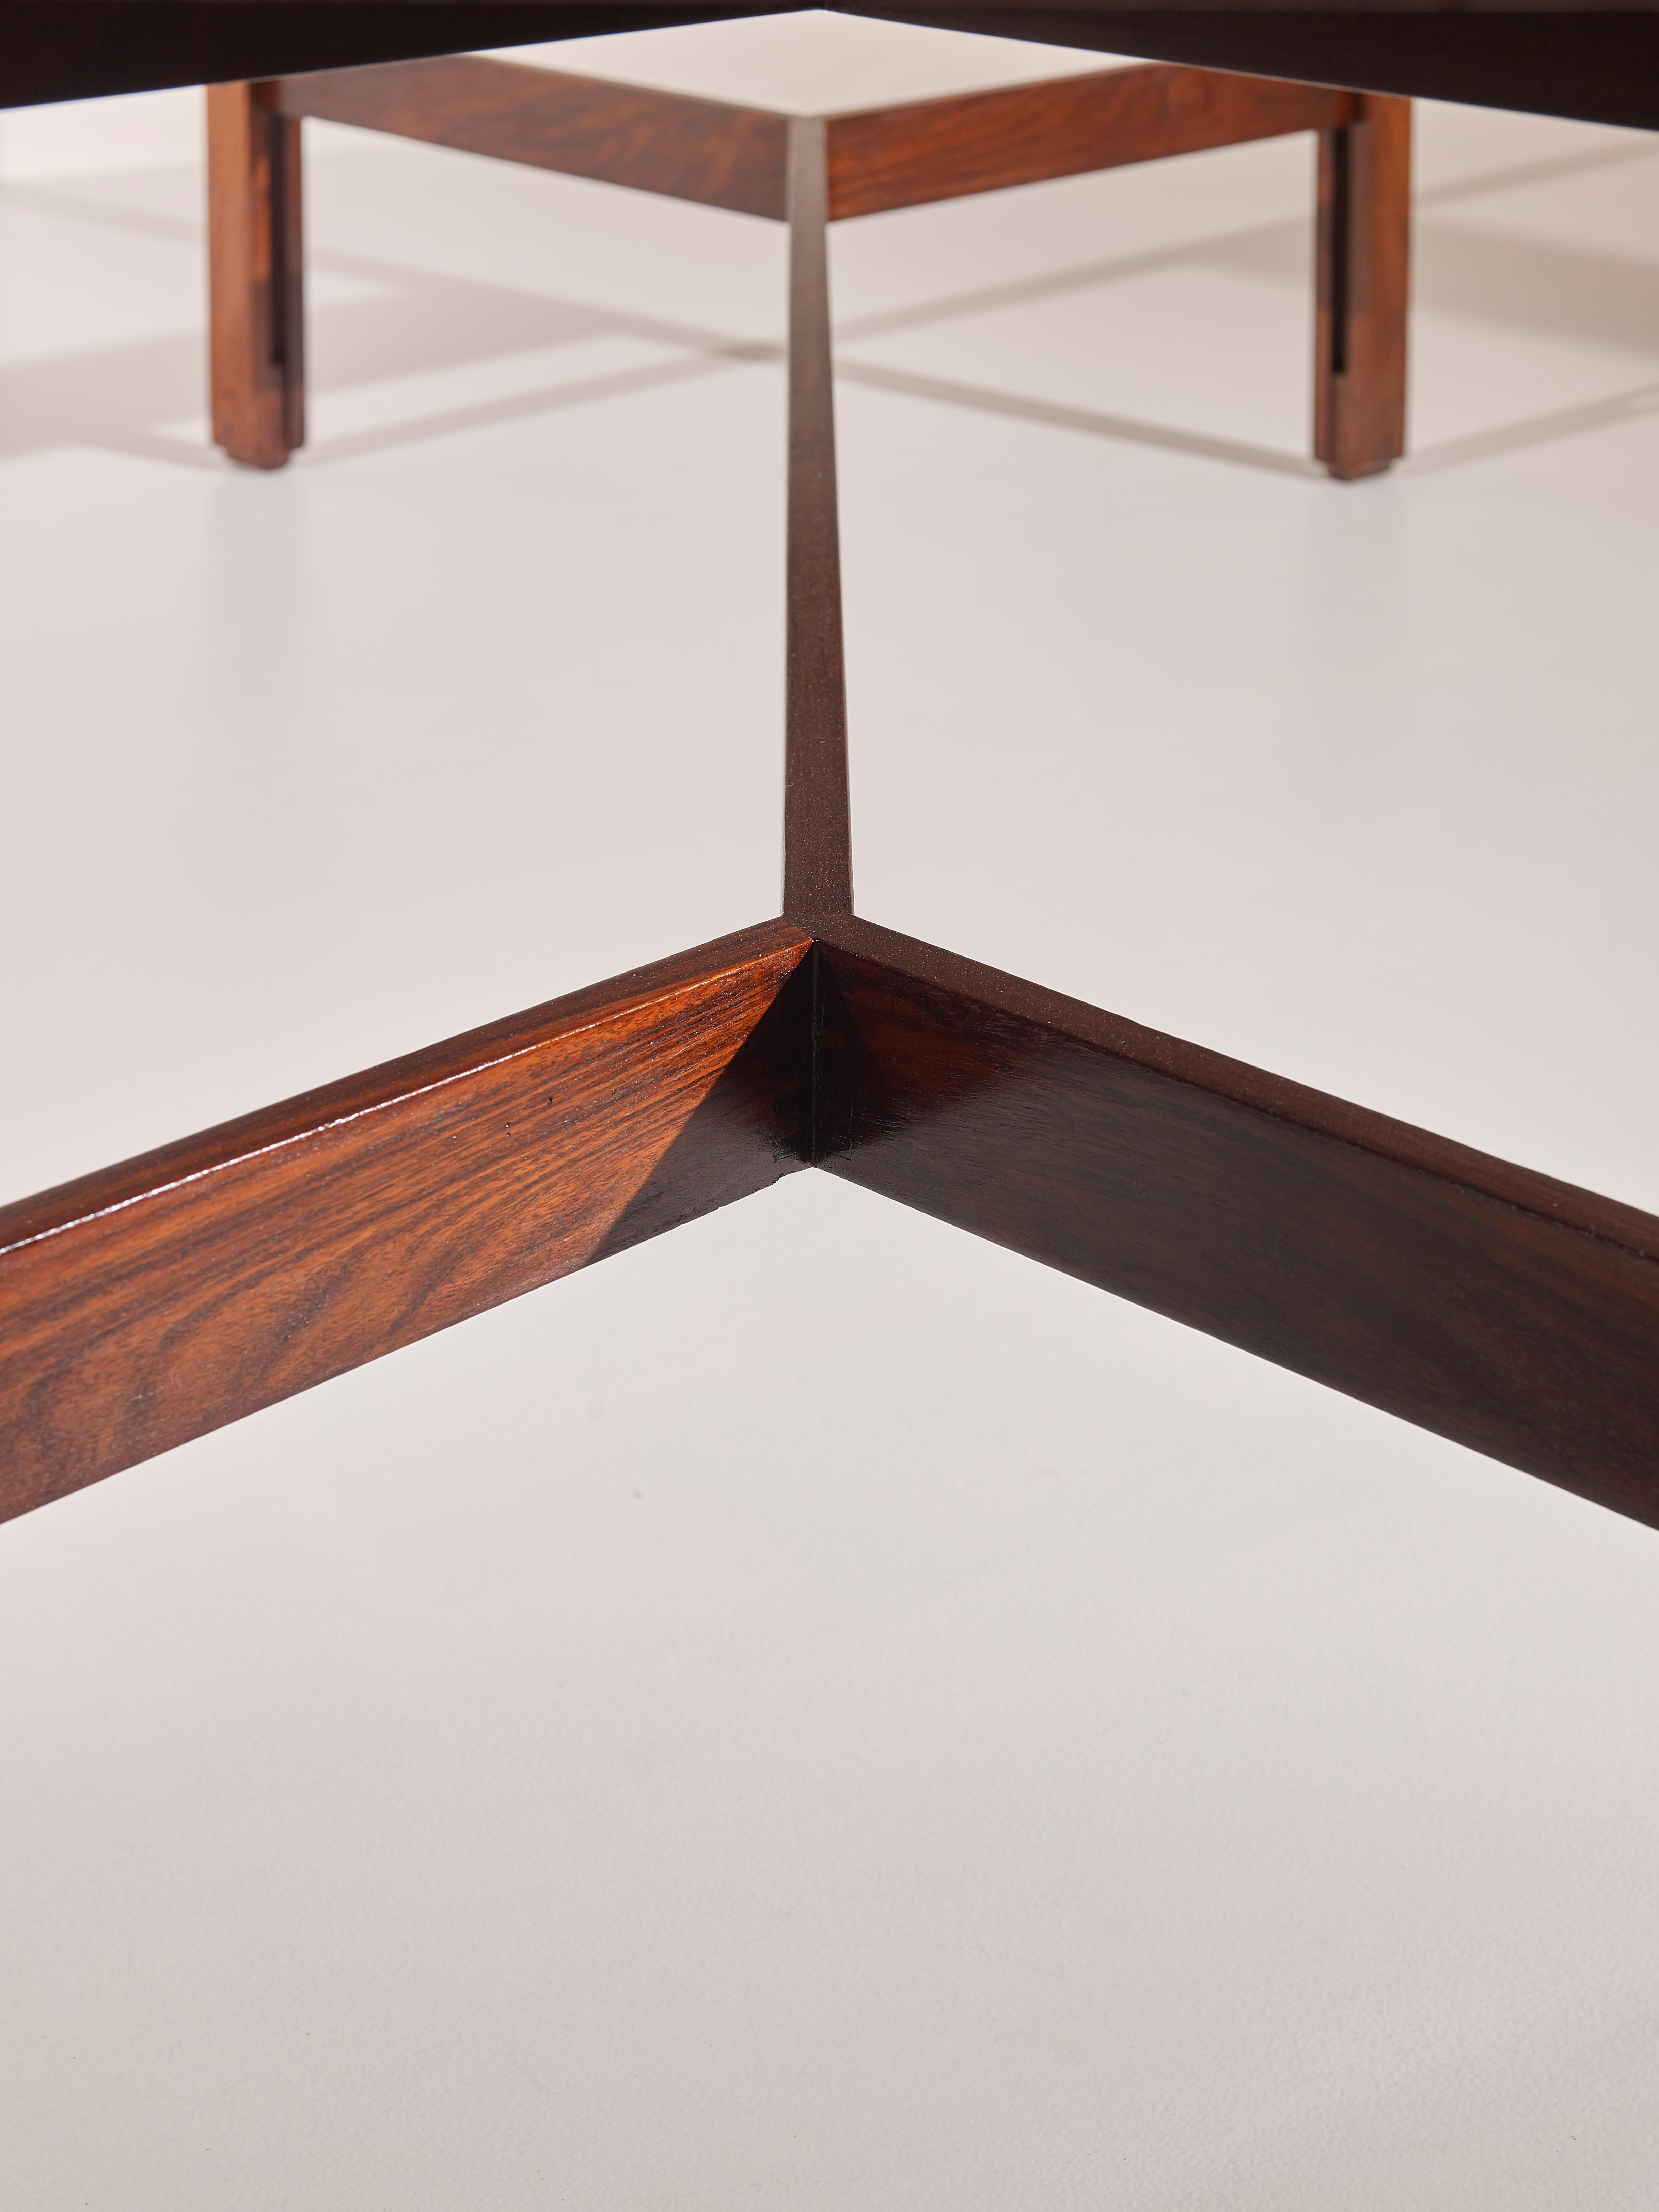 Mid-Century Modern Ico Parisi Rosewood Dining Table Mod. 754/2 for Figli Di Amedeo Cassina, 1959 For Sale